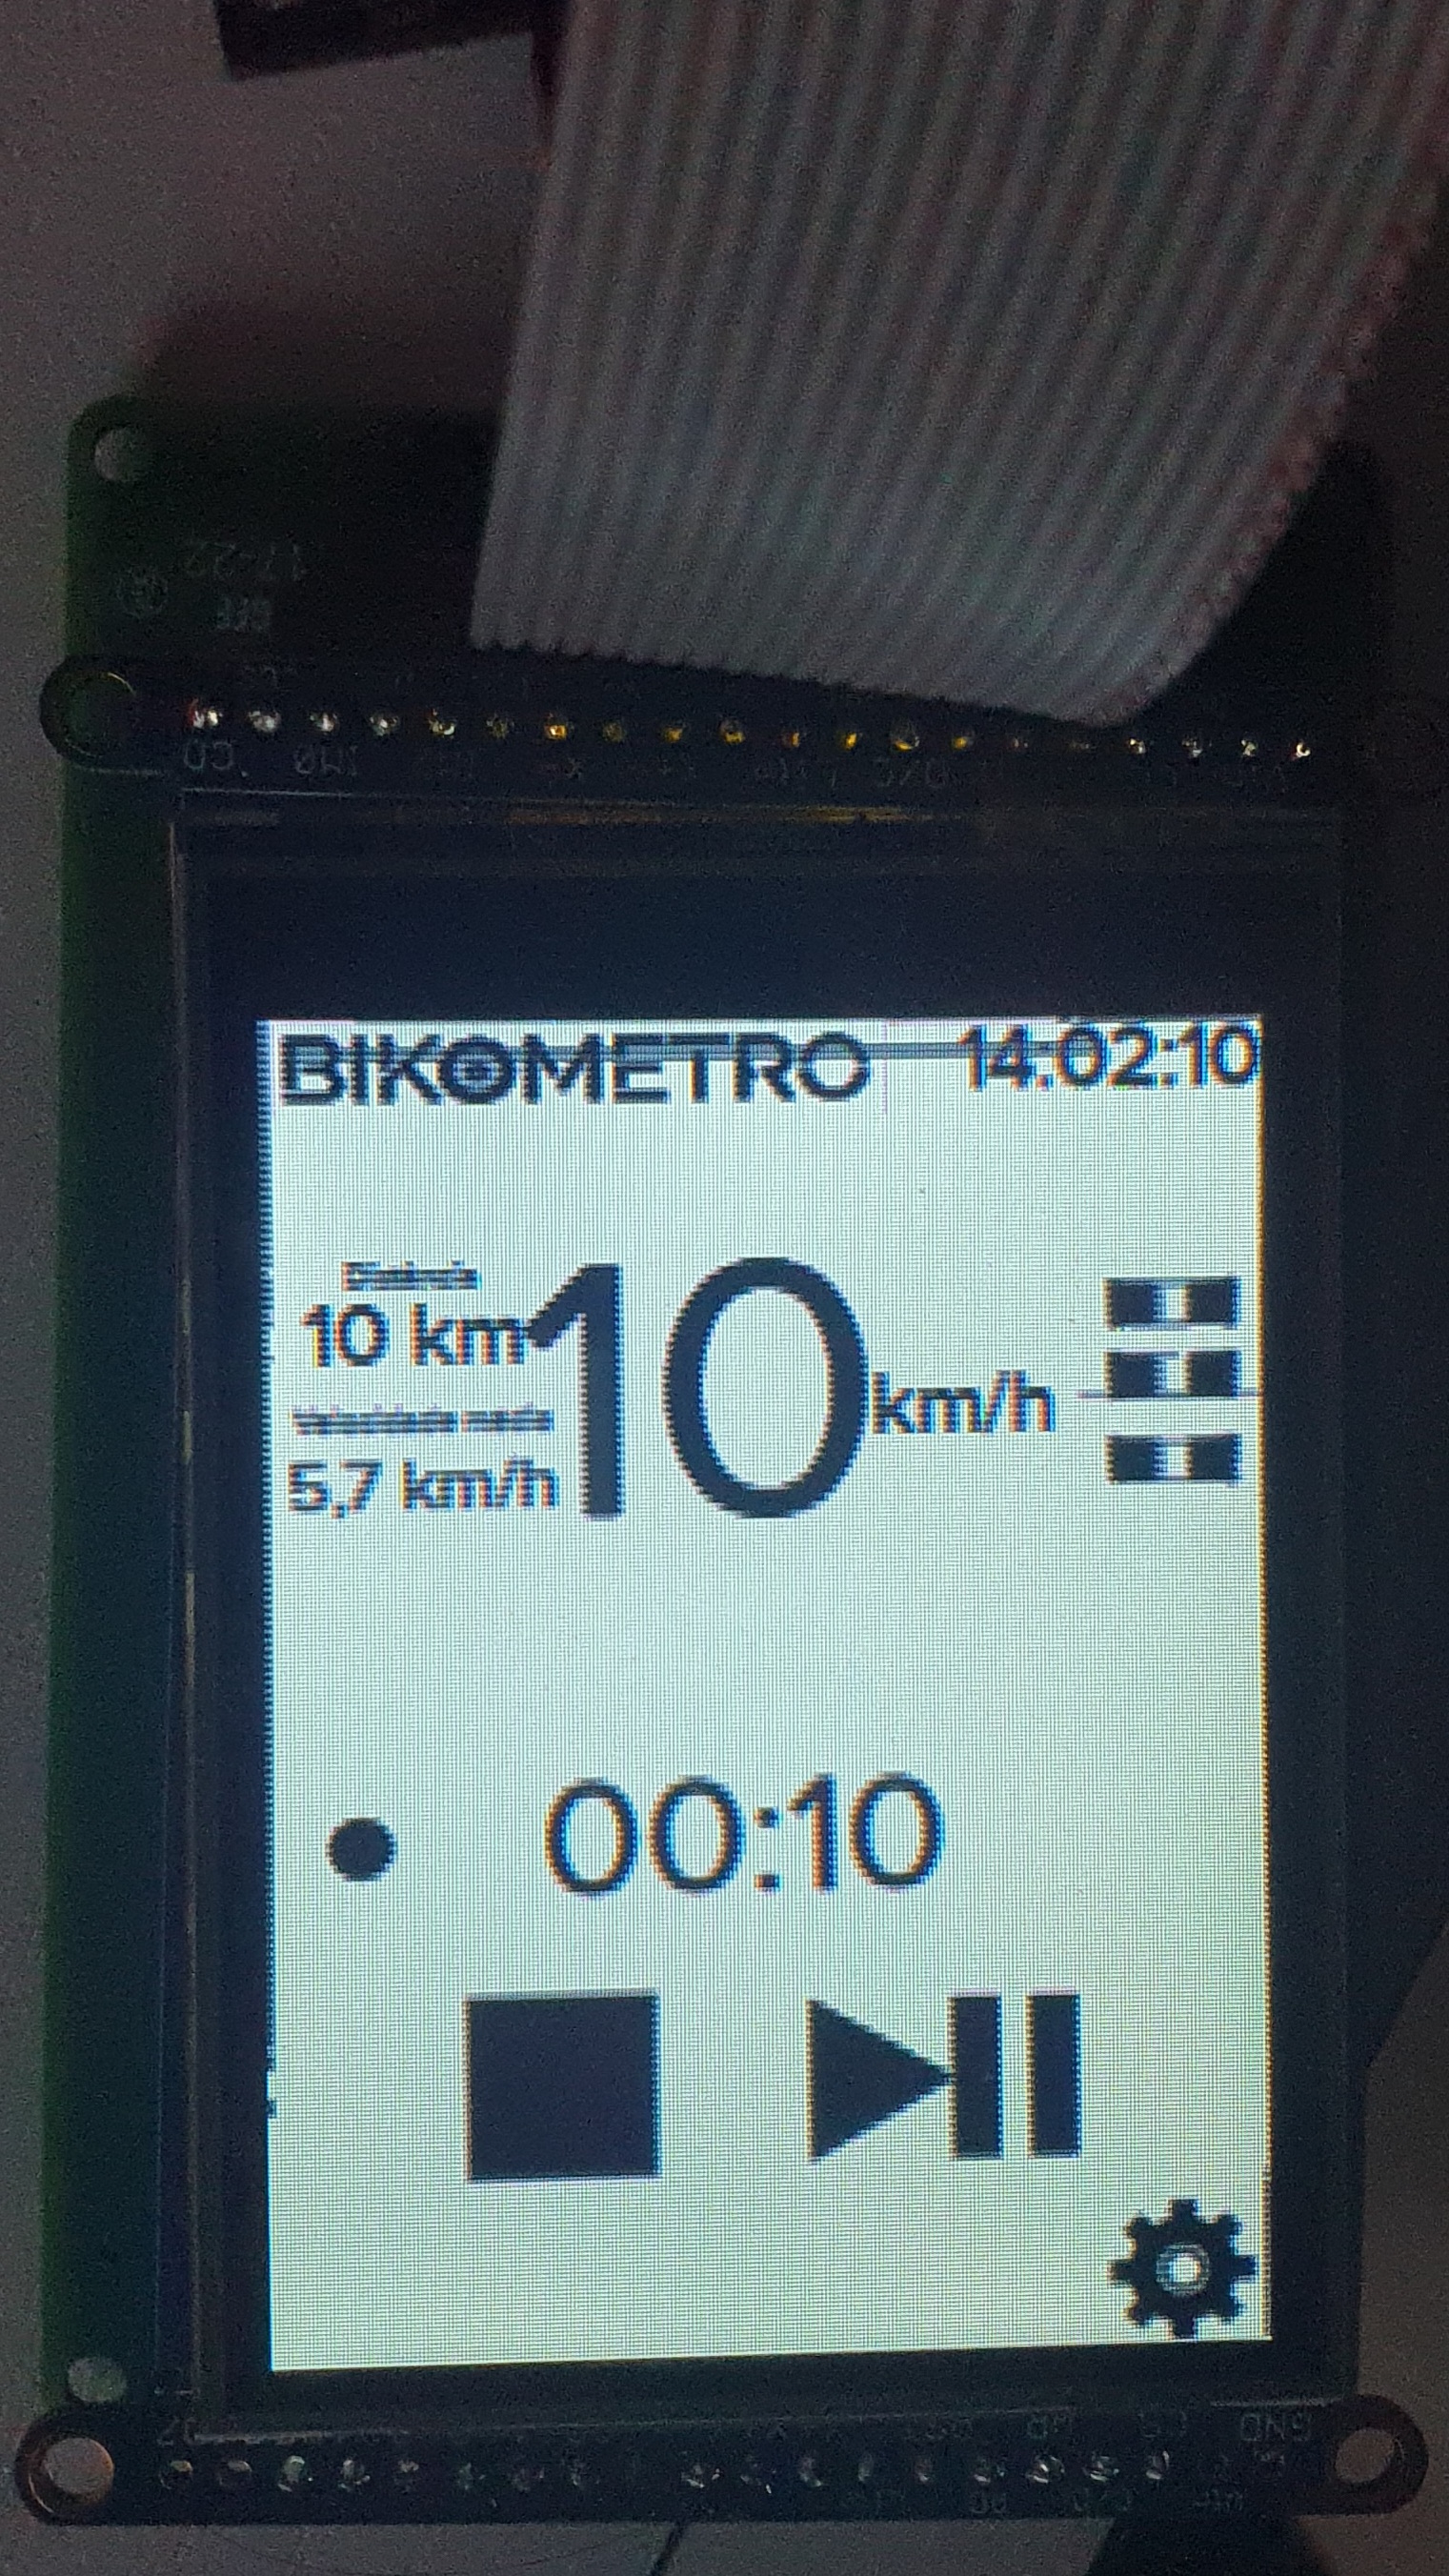 First screen of the interface on the LCD